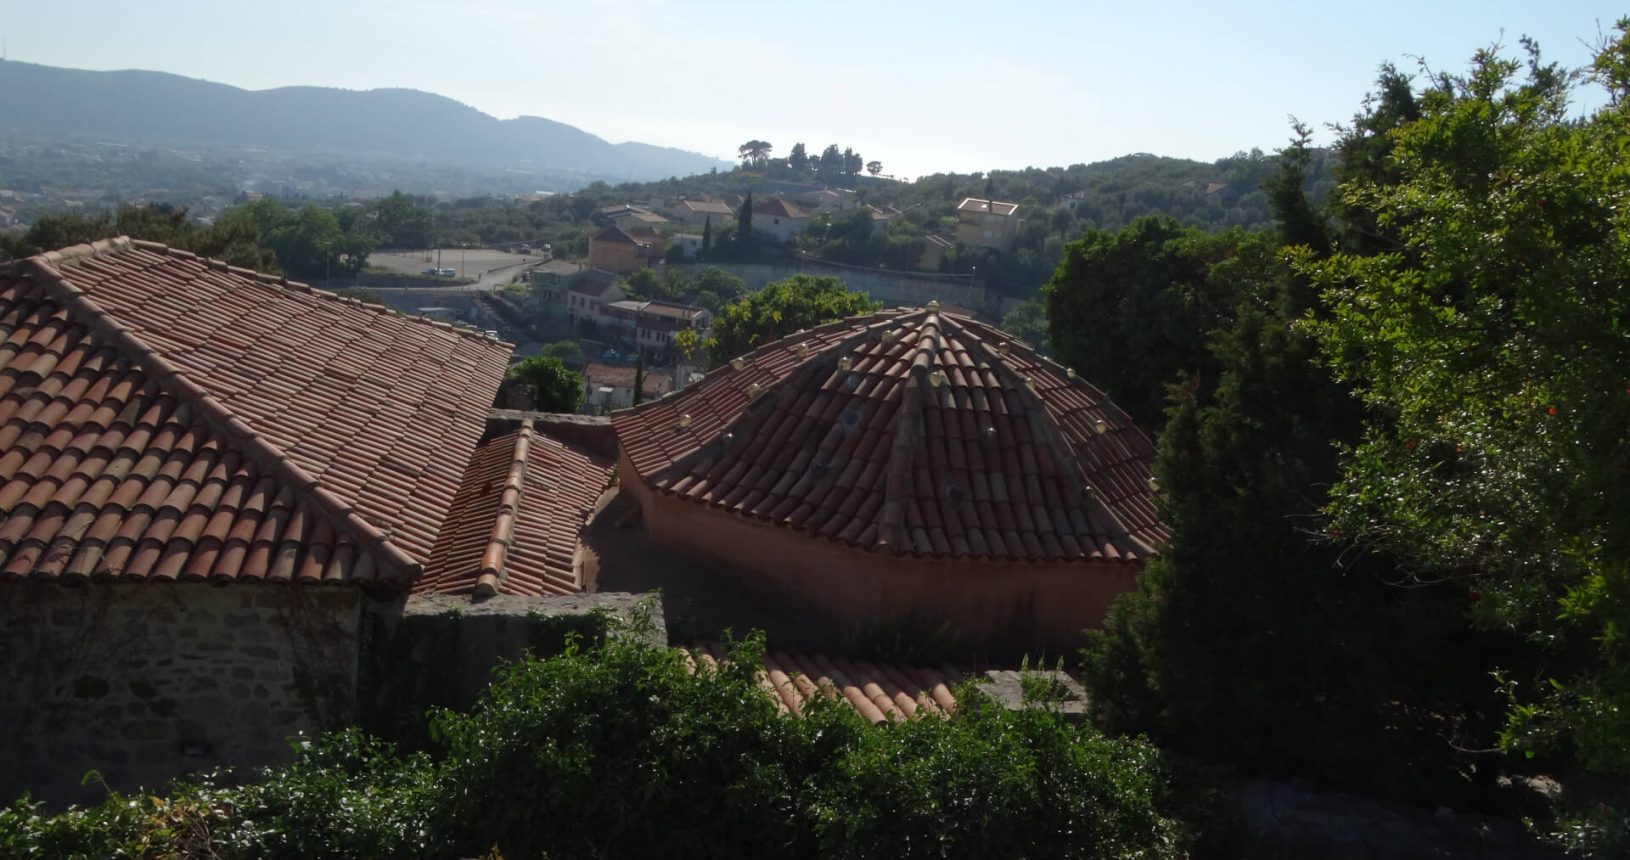 The roofs of buildings in Old Bar